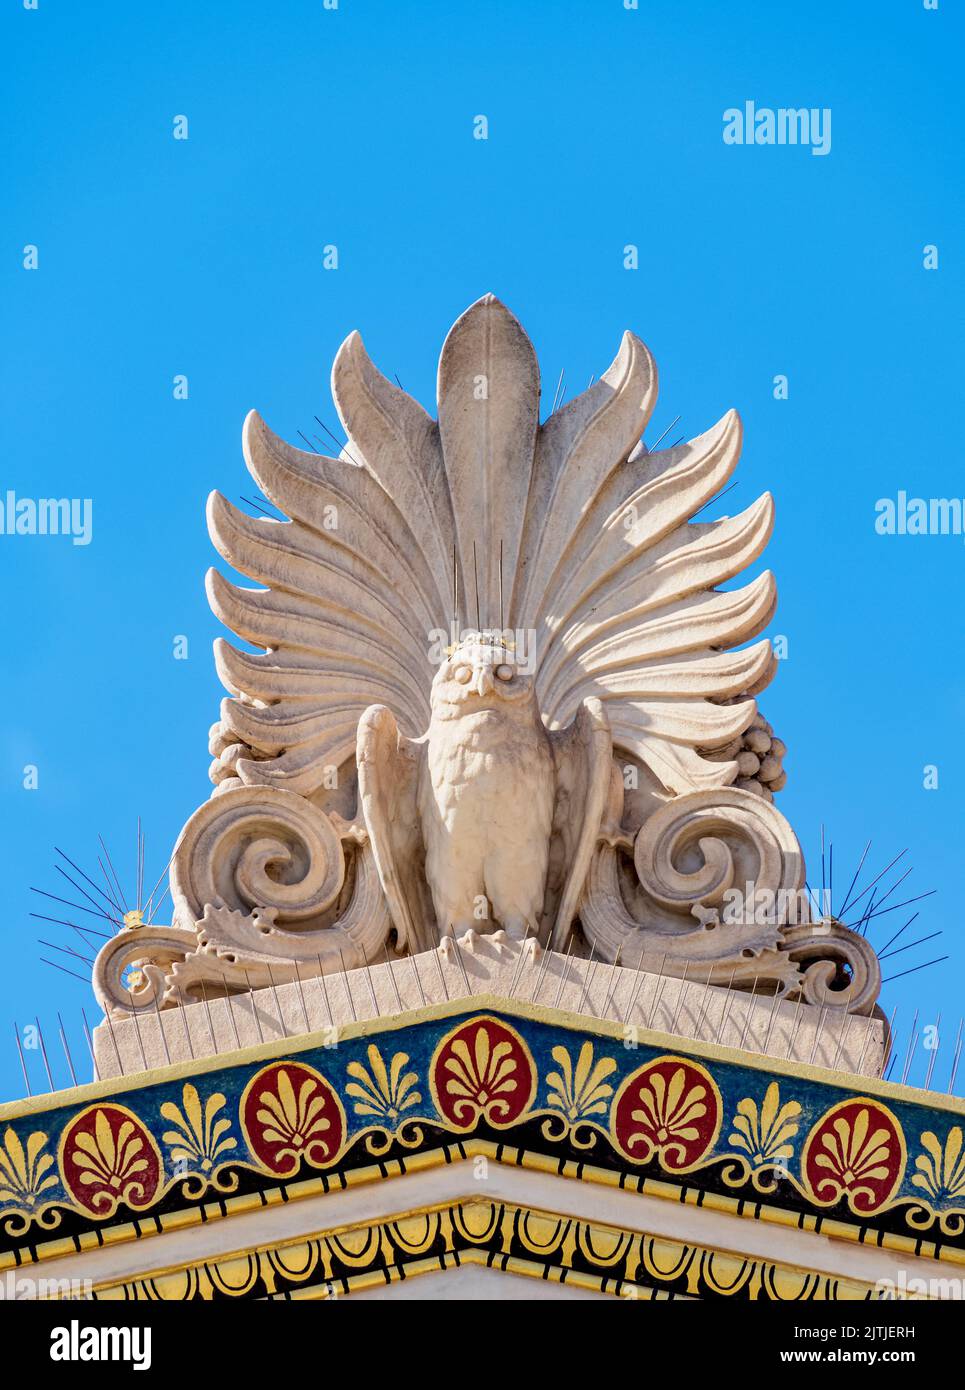 Owl Sculpture at The Academy of Athens, detailed view, Athens, Attica, Greece Stock Photo